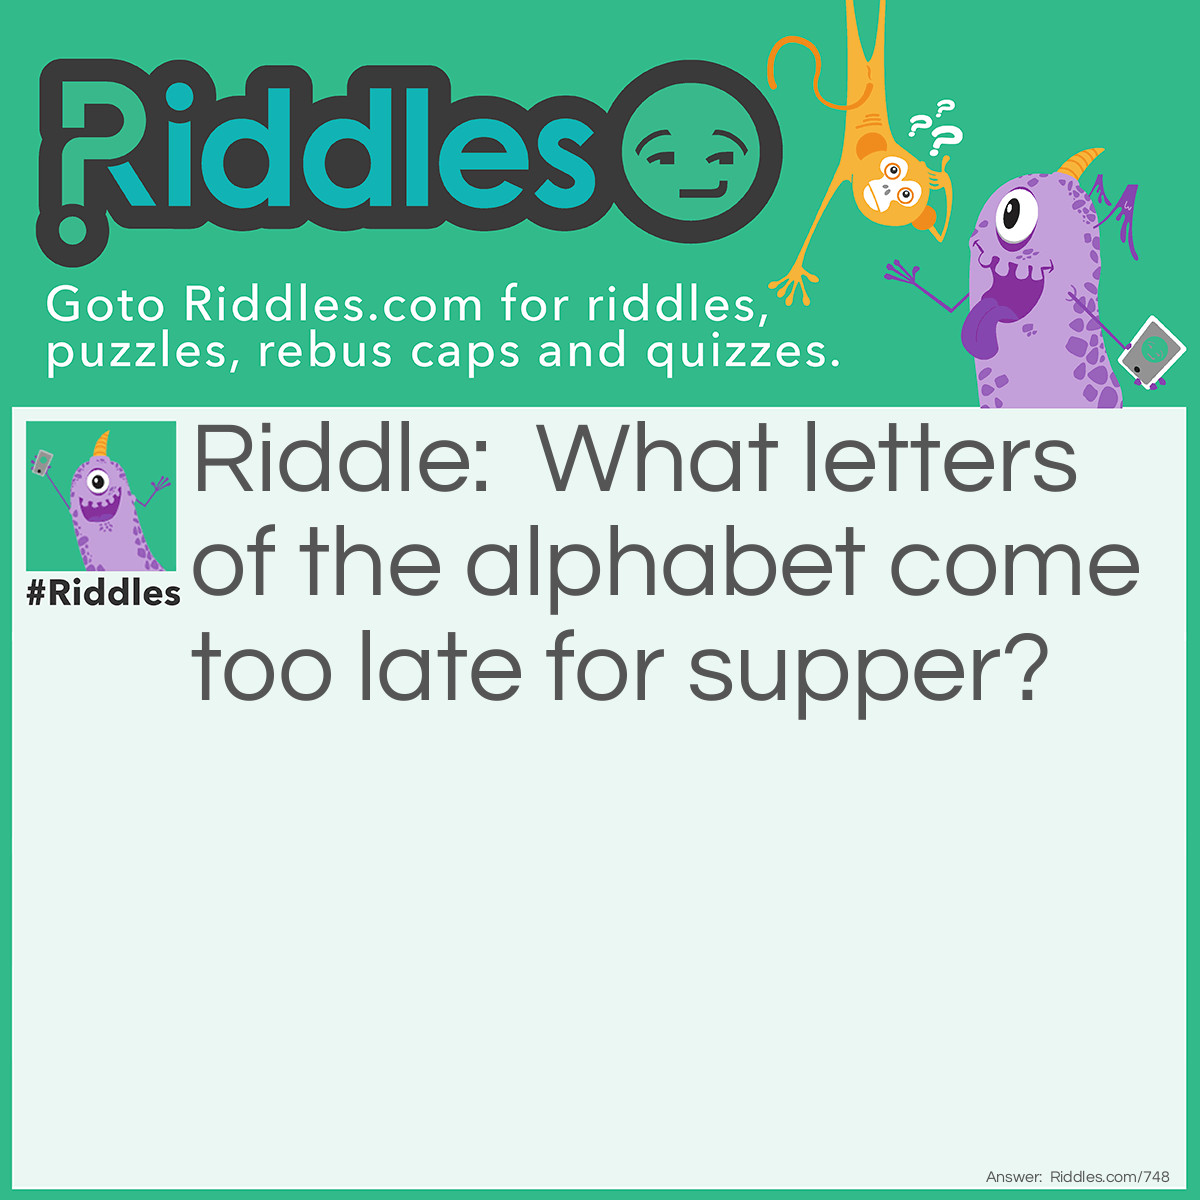 Riddle: What letters of the <a href="/quiz/alphabet-riddles">alphabet</a> come too late for supper? Answer: Those that come after T.